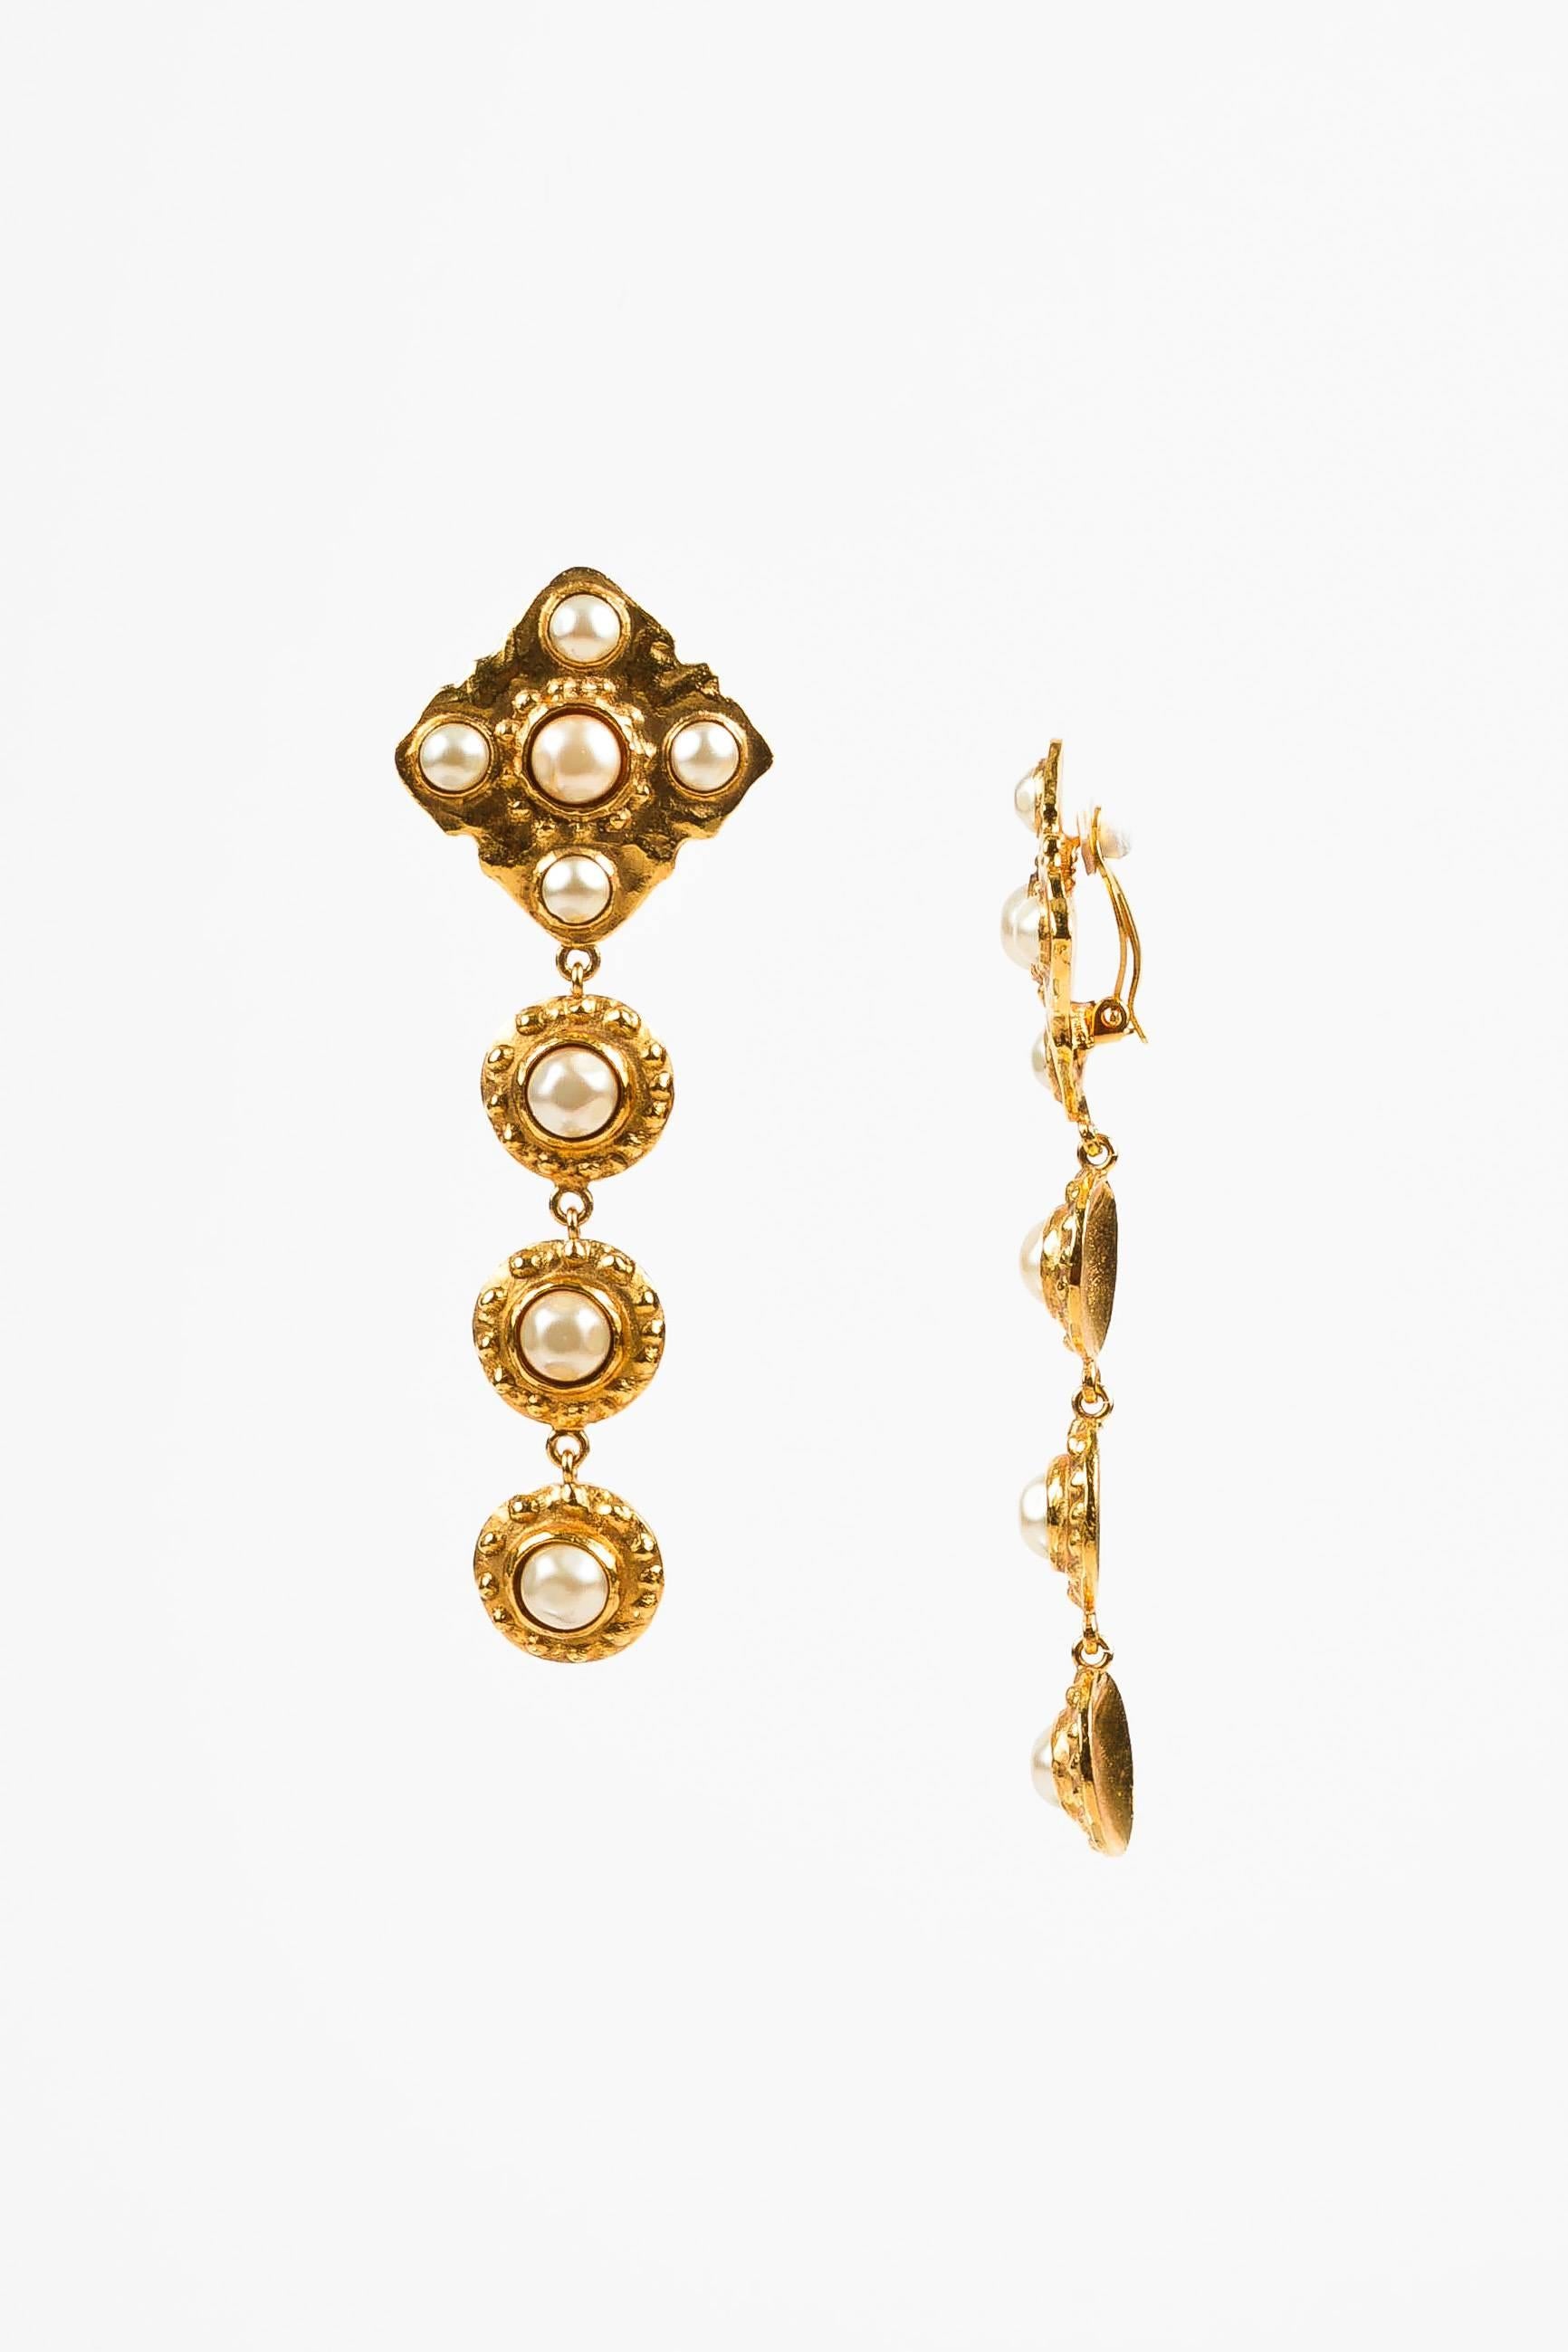 Circa 1986, these vintage Chanel earrings feature dangling textured gold-tone metal discs. Each is embellished with a round faux pearl at the center. At the top is a square with matching texture and faux pearl detailing. Clip-on closure on back.